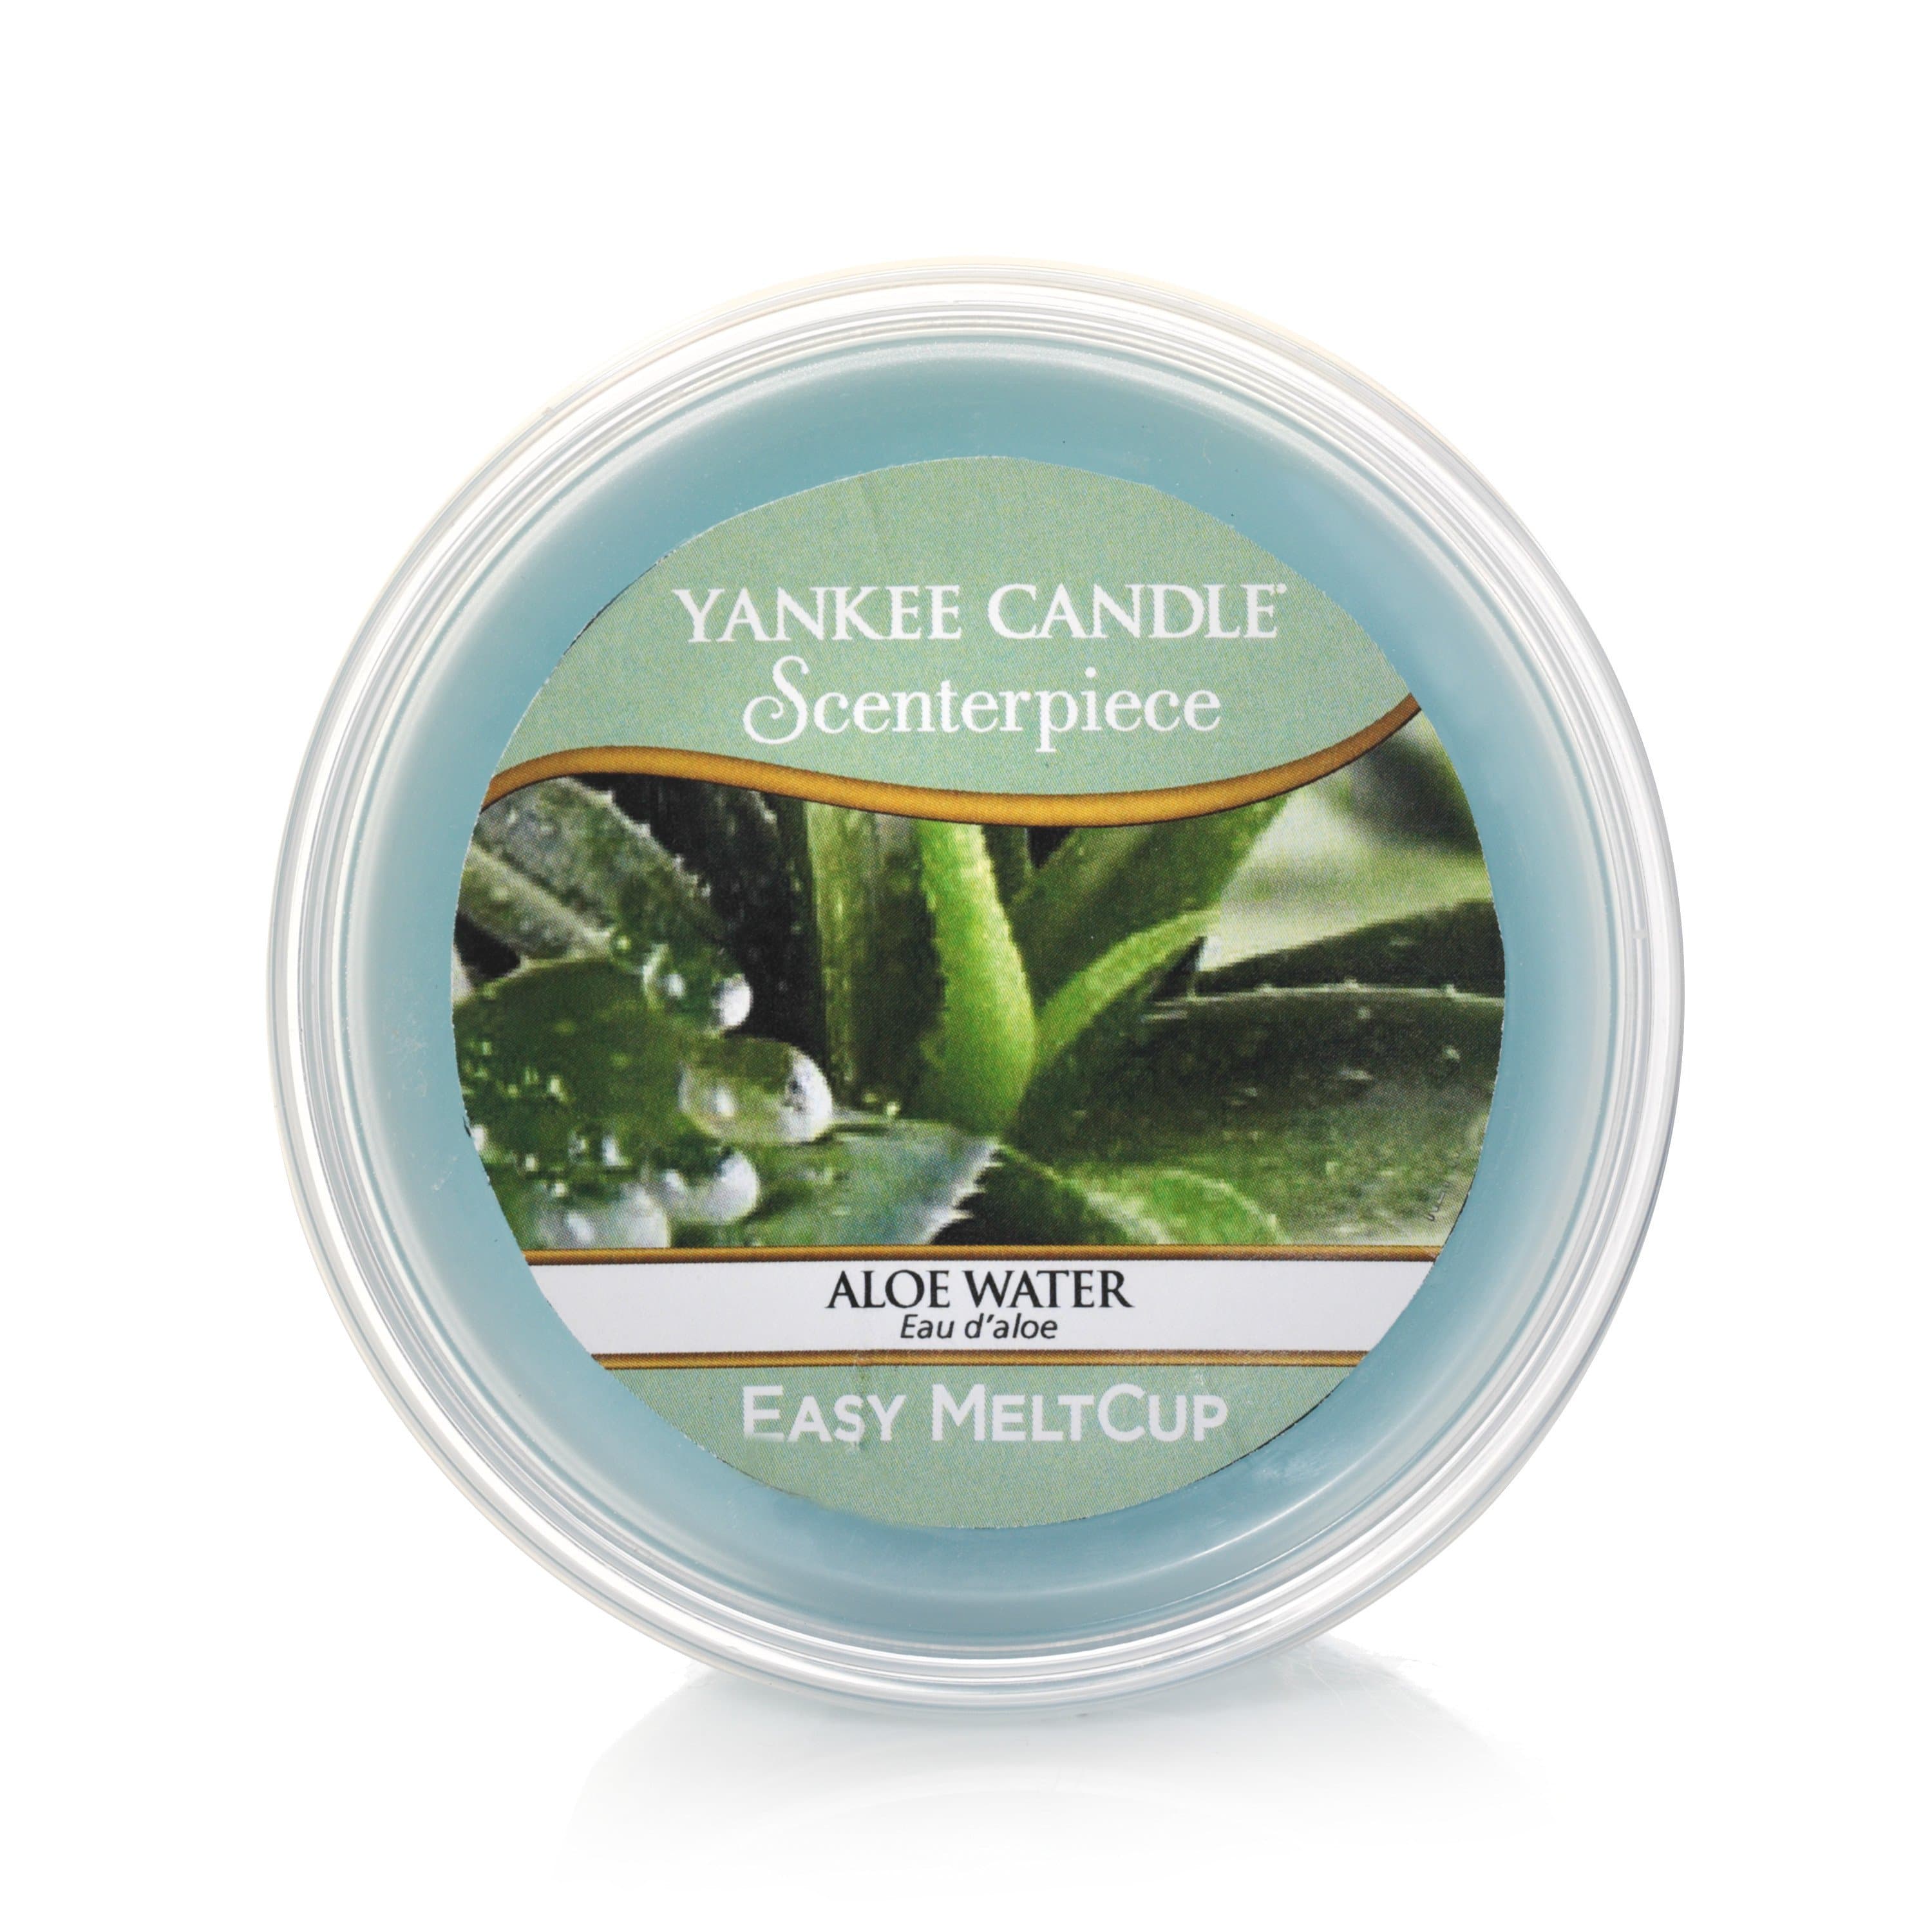 Yankee Candle Melt Cup Yankee Candle Scenterpiece Melt Cup - Aloe Water